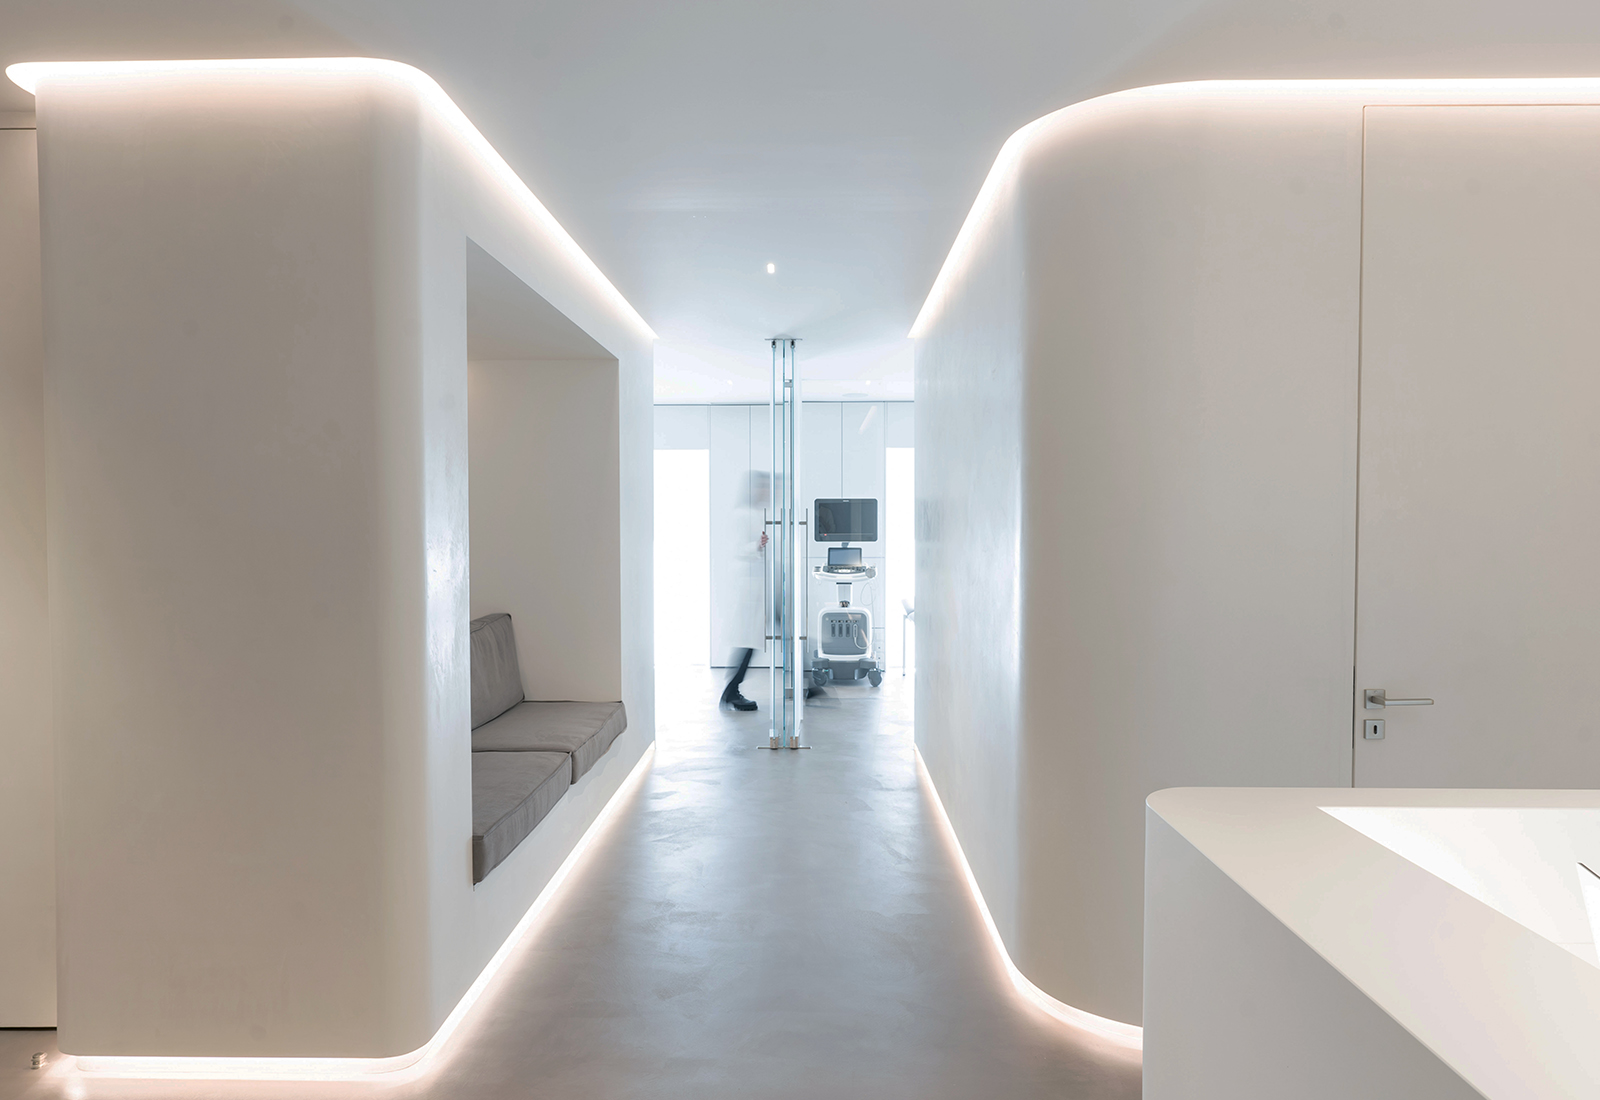 Archisearch Renovation of a cardiology practice in Larissa, Greece by KORDAS Architects